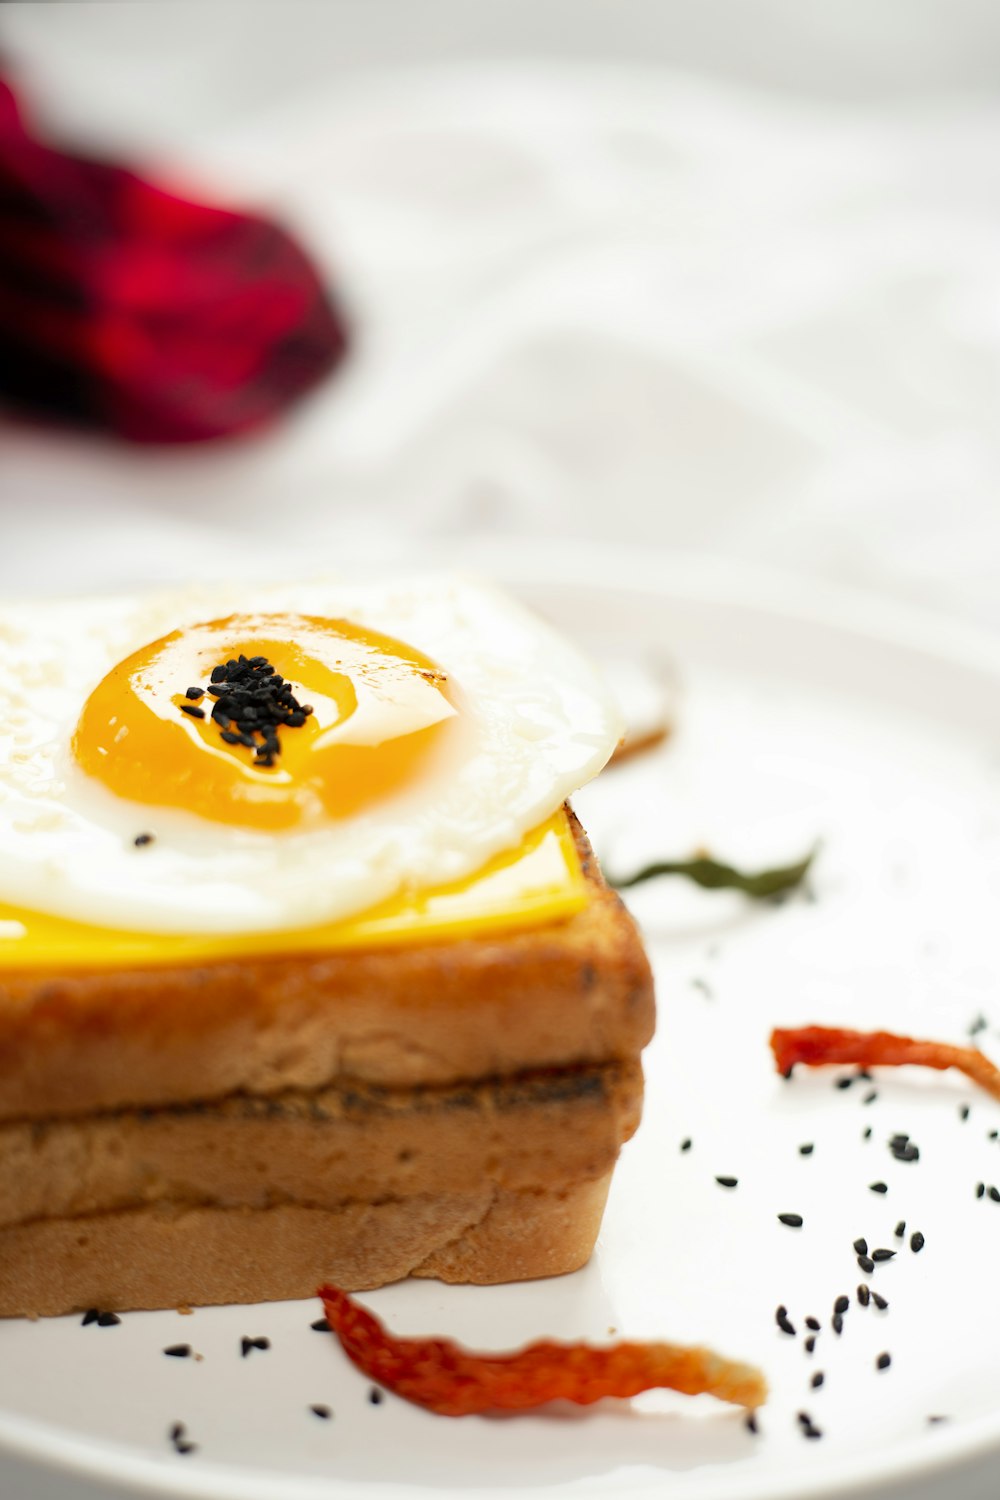 brown bread with yellow cream on white ceramic plate